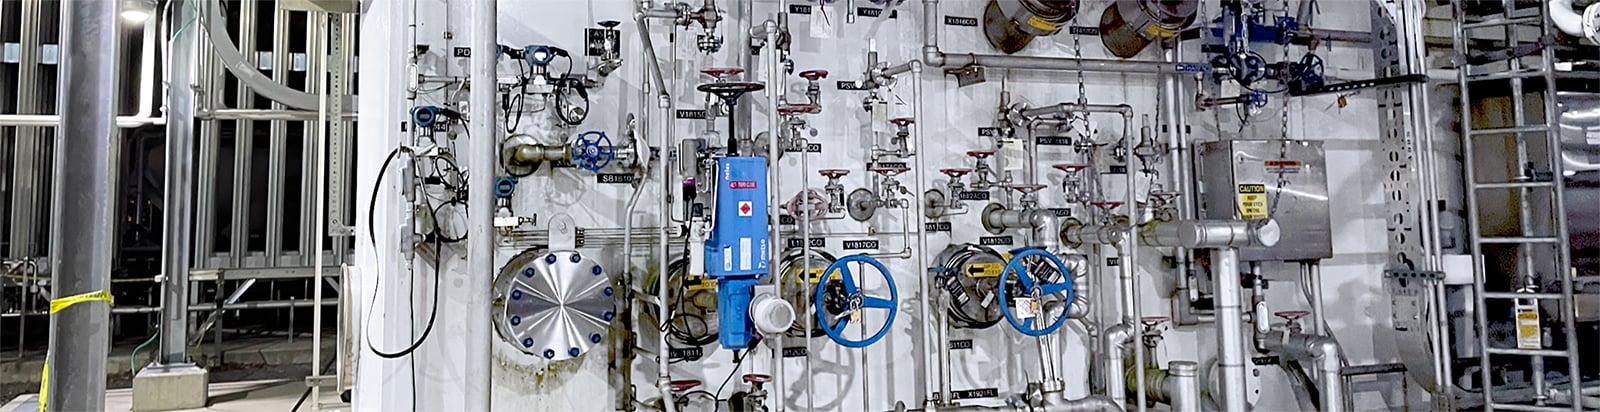 Cryogenic Services for Air Separation - Gas Processing - Industrial Gas Production